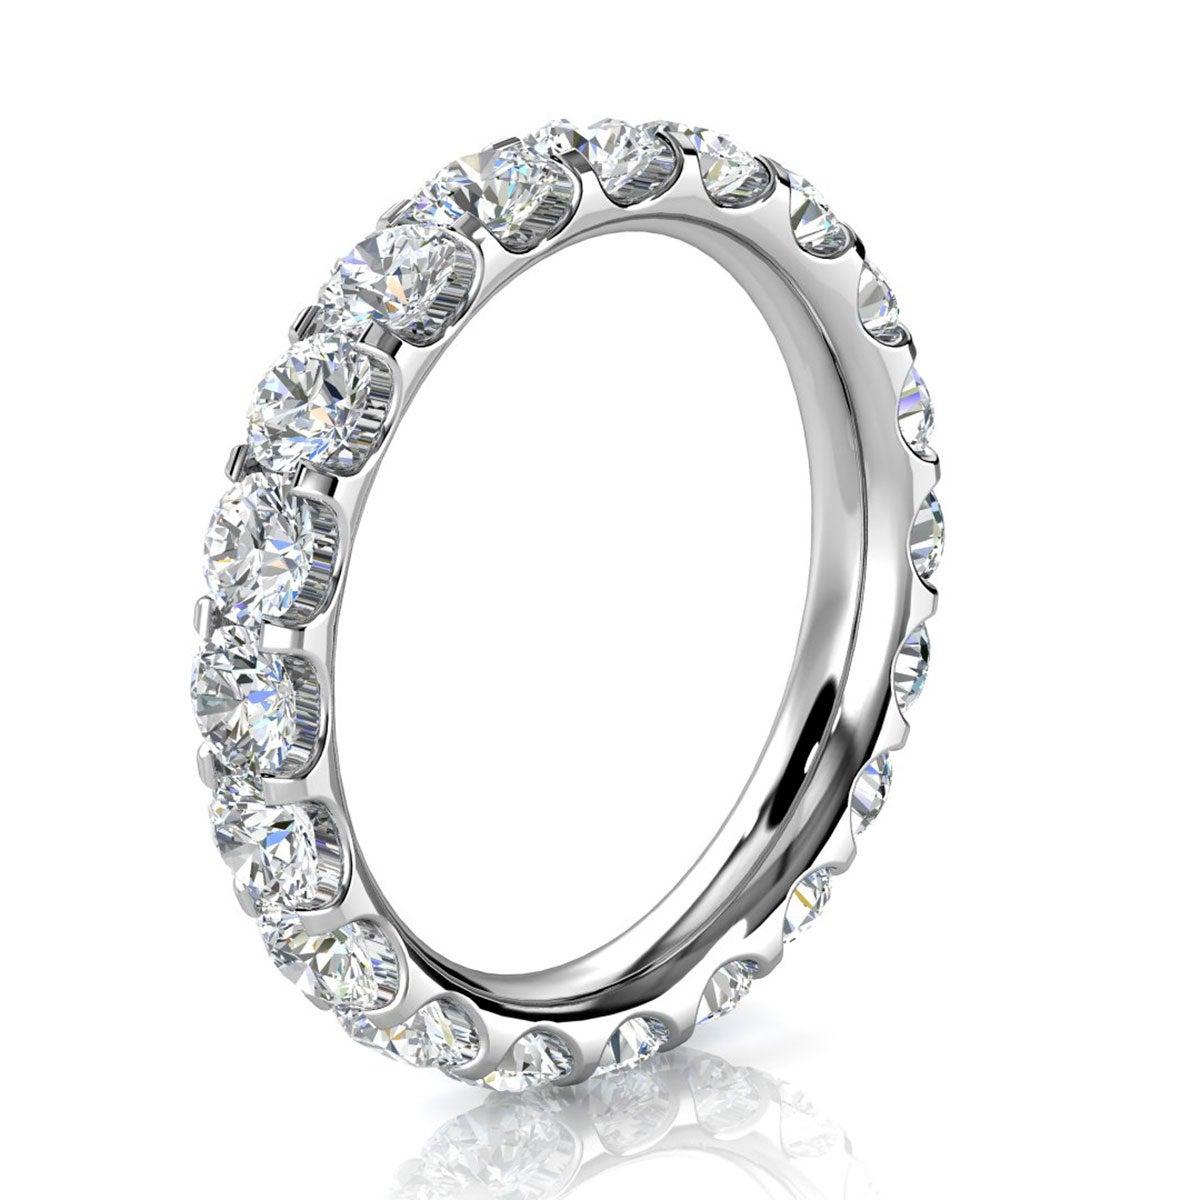 For Sale:  18k White Gold Viola Eternity Micro-Prong Diamond Ring '2 Ct. tw' 2